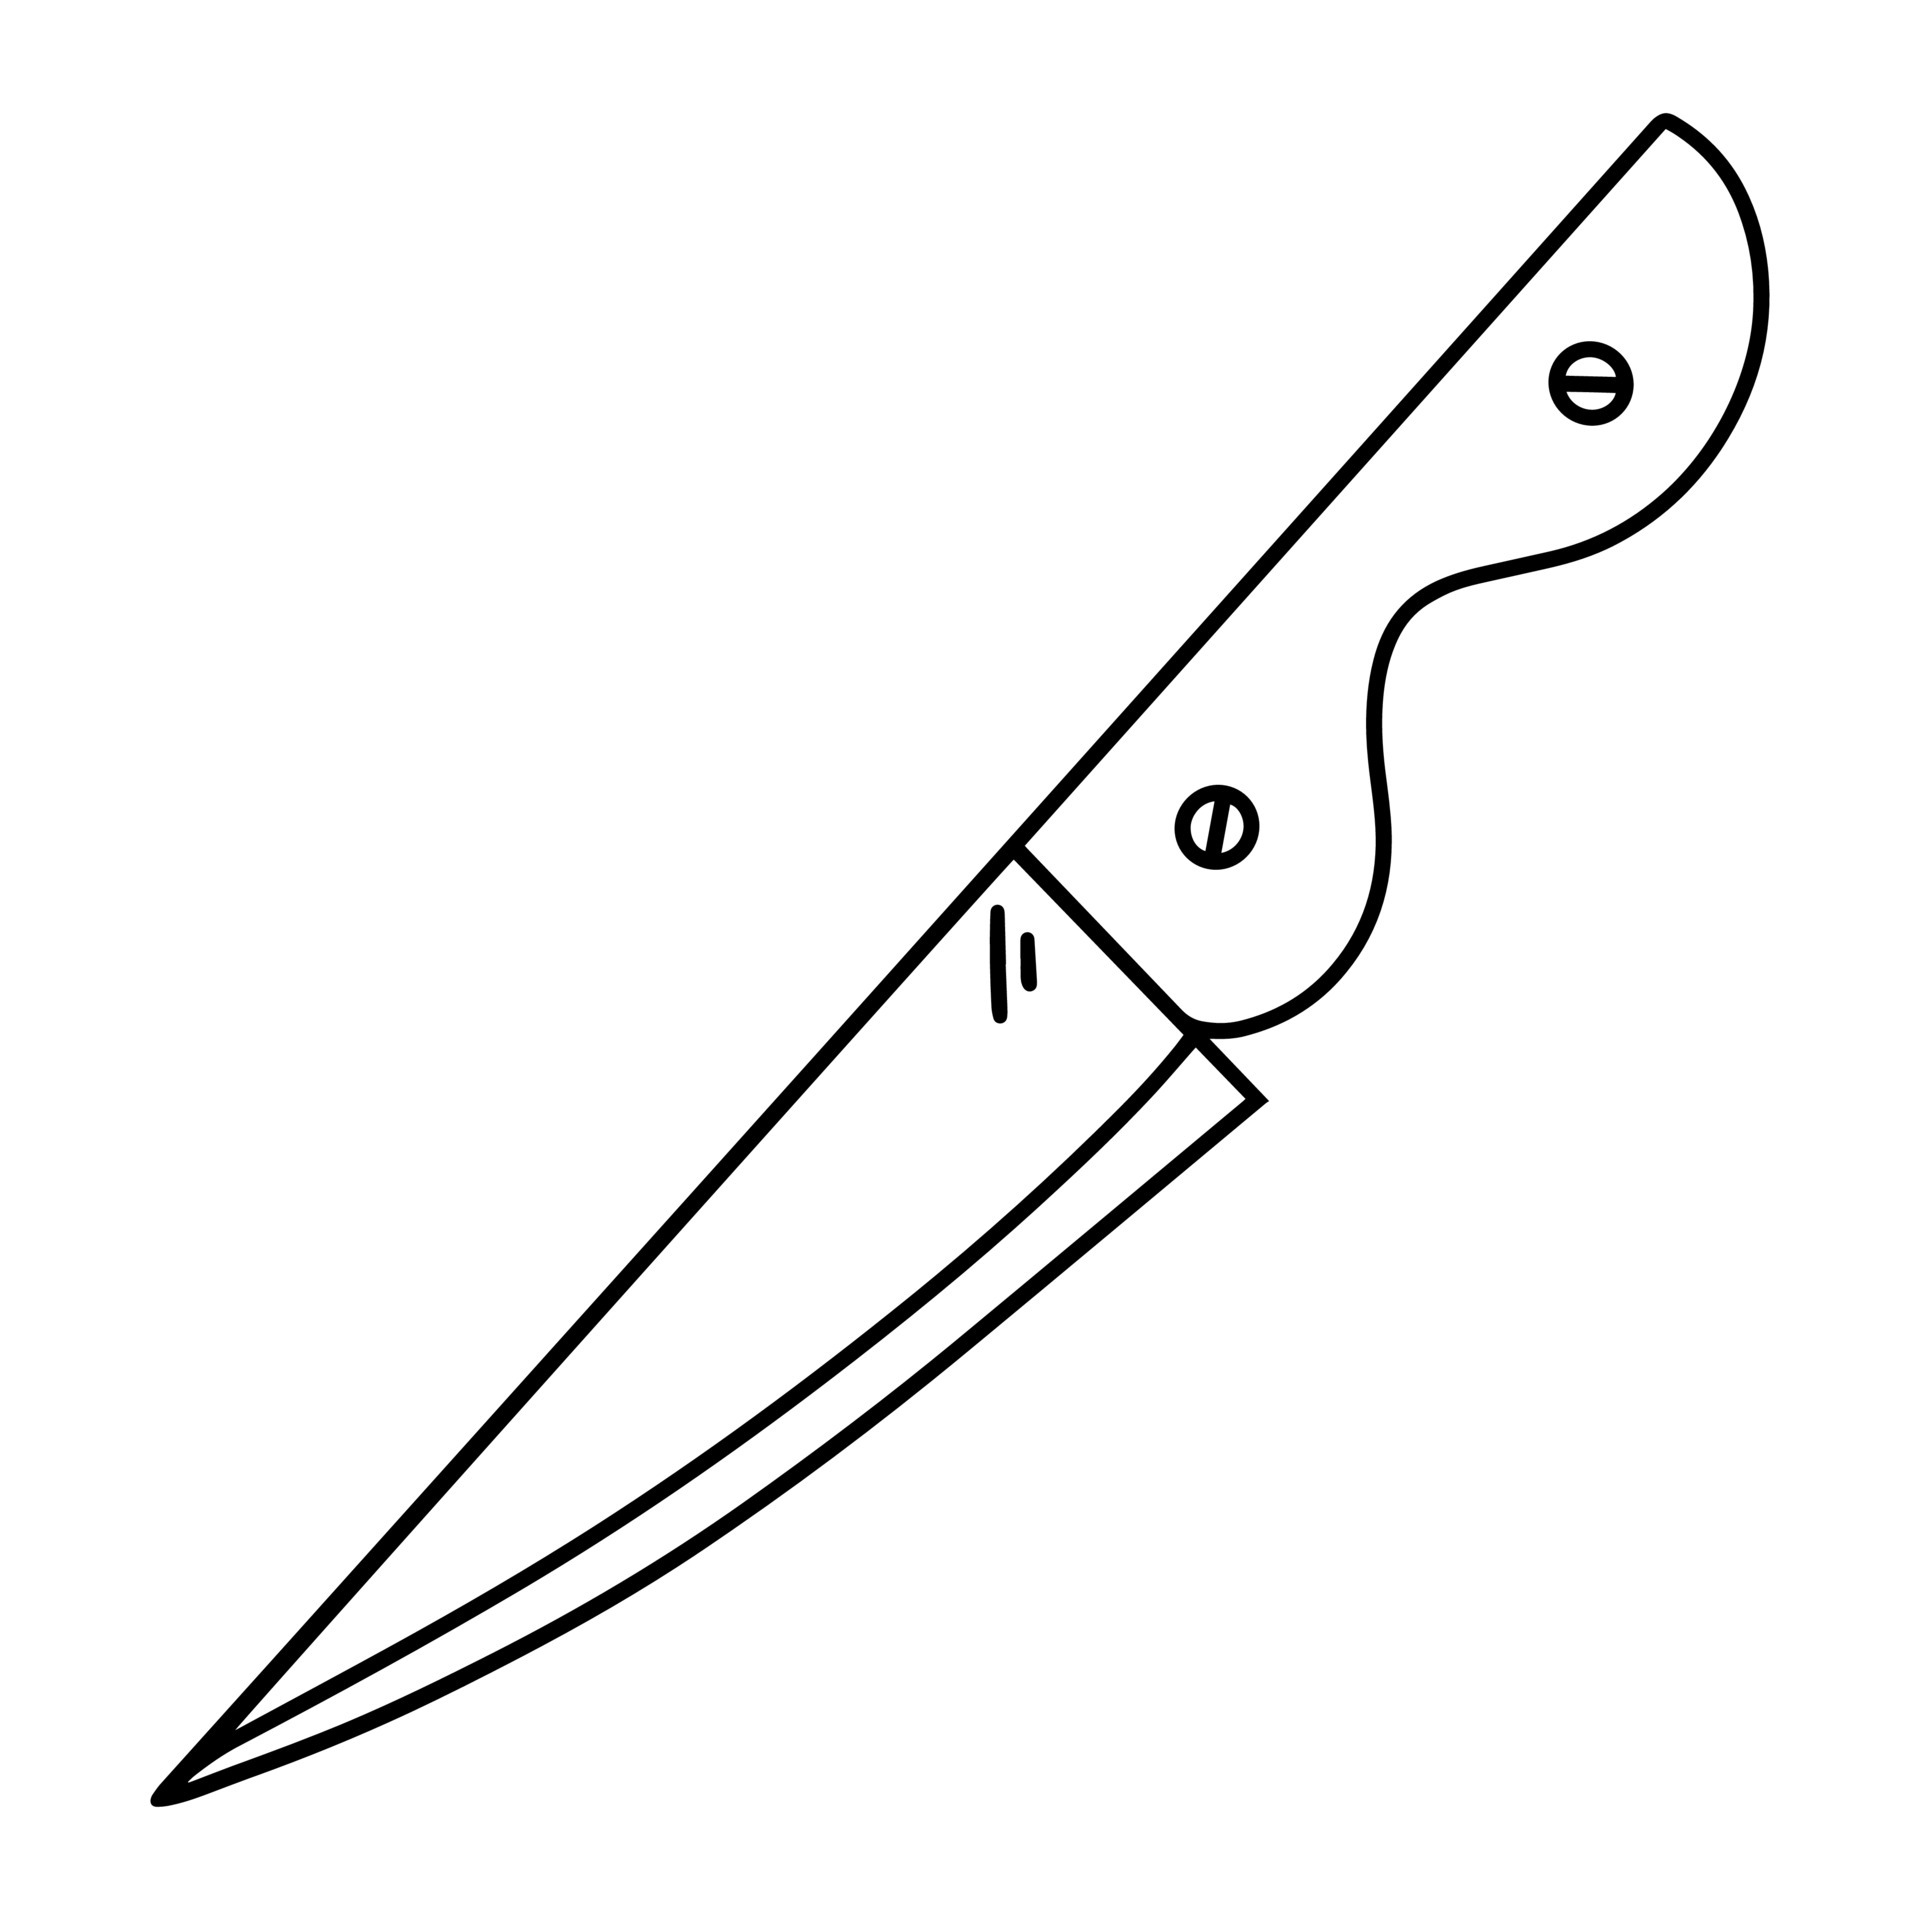 https://static.vecteezy.com/system/resources/previews/004/999/892/original/kitchen-knife-icon-hand-drawn-illustration-isolated-on-white-background-sharp-chef-s-tool-with-steel-blade-wooden-handle-a-simple-culinary-sketch-chopper-for-cutting-meat-fish-vector.jpg